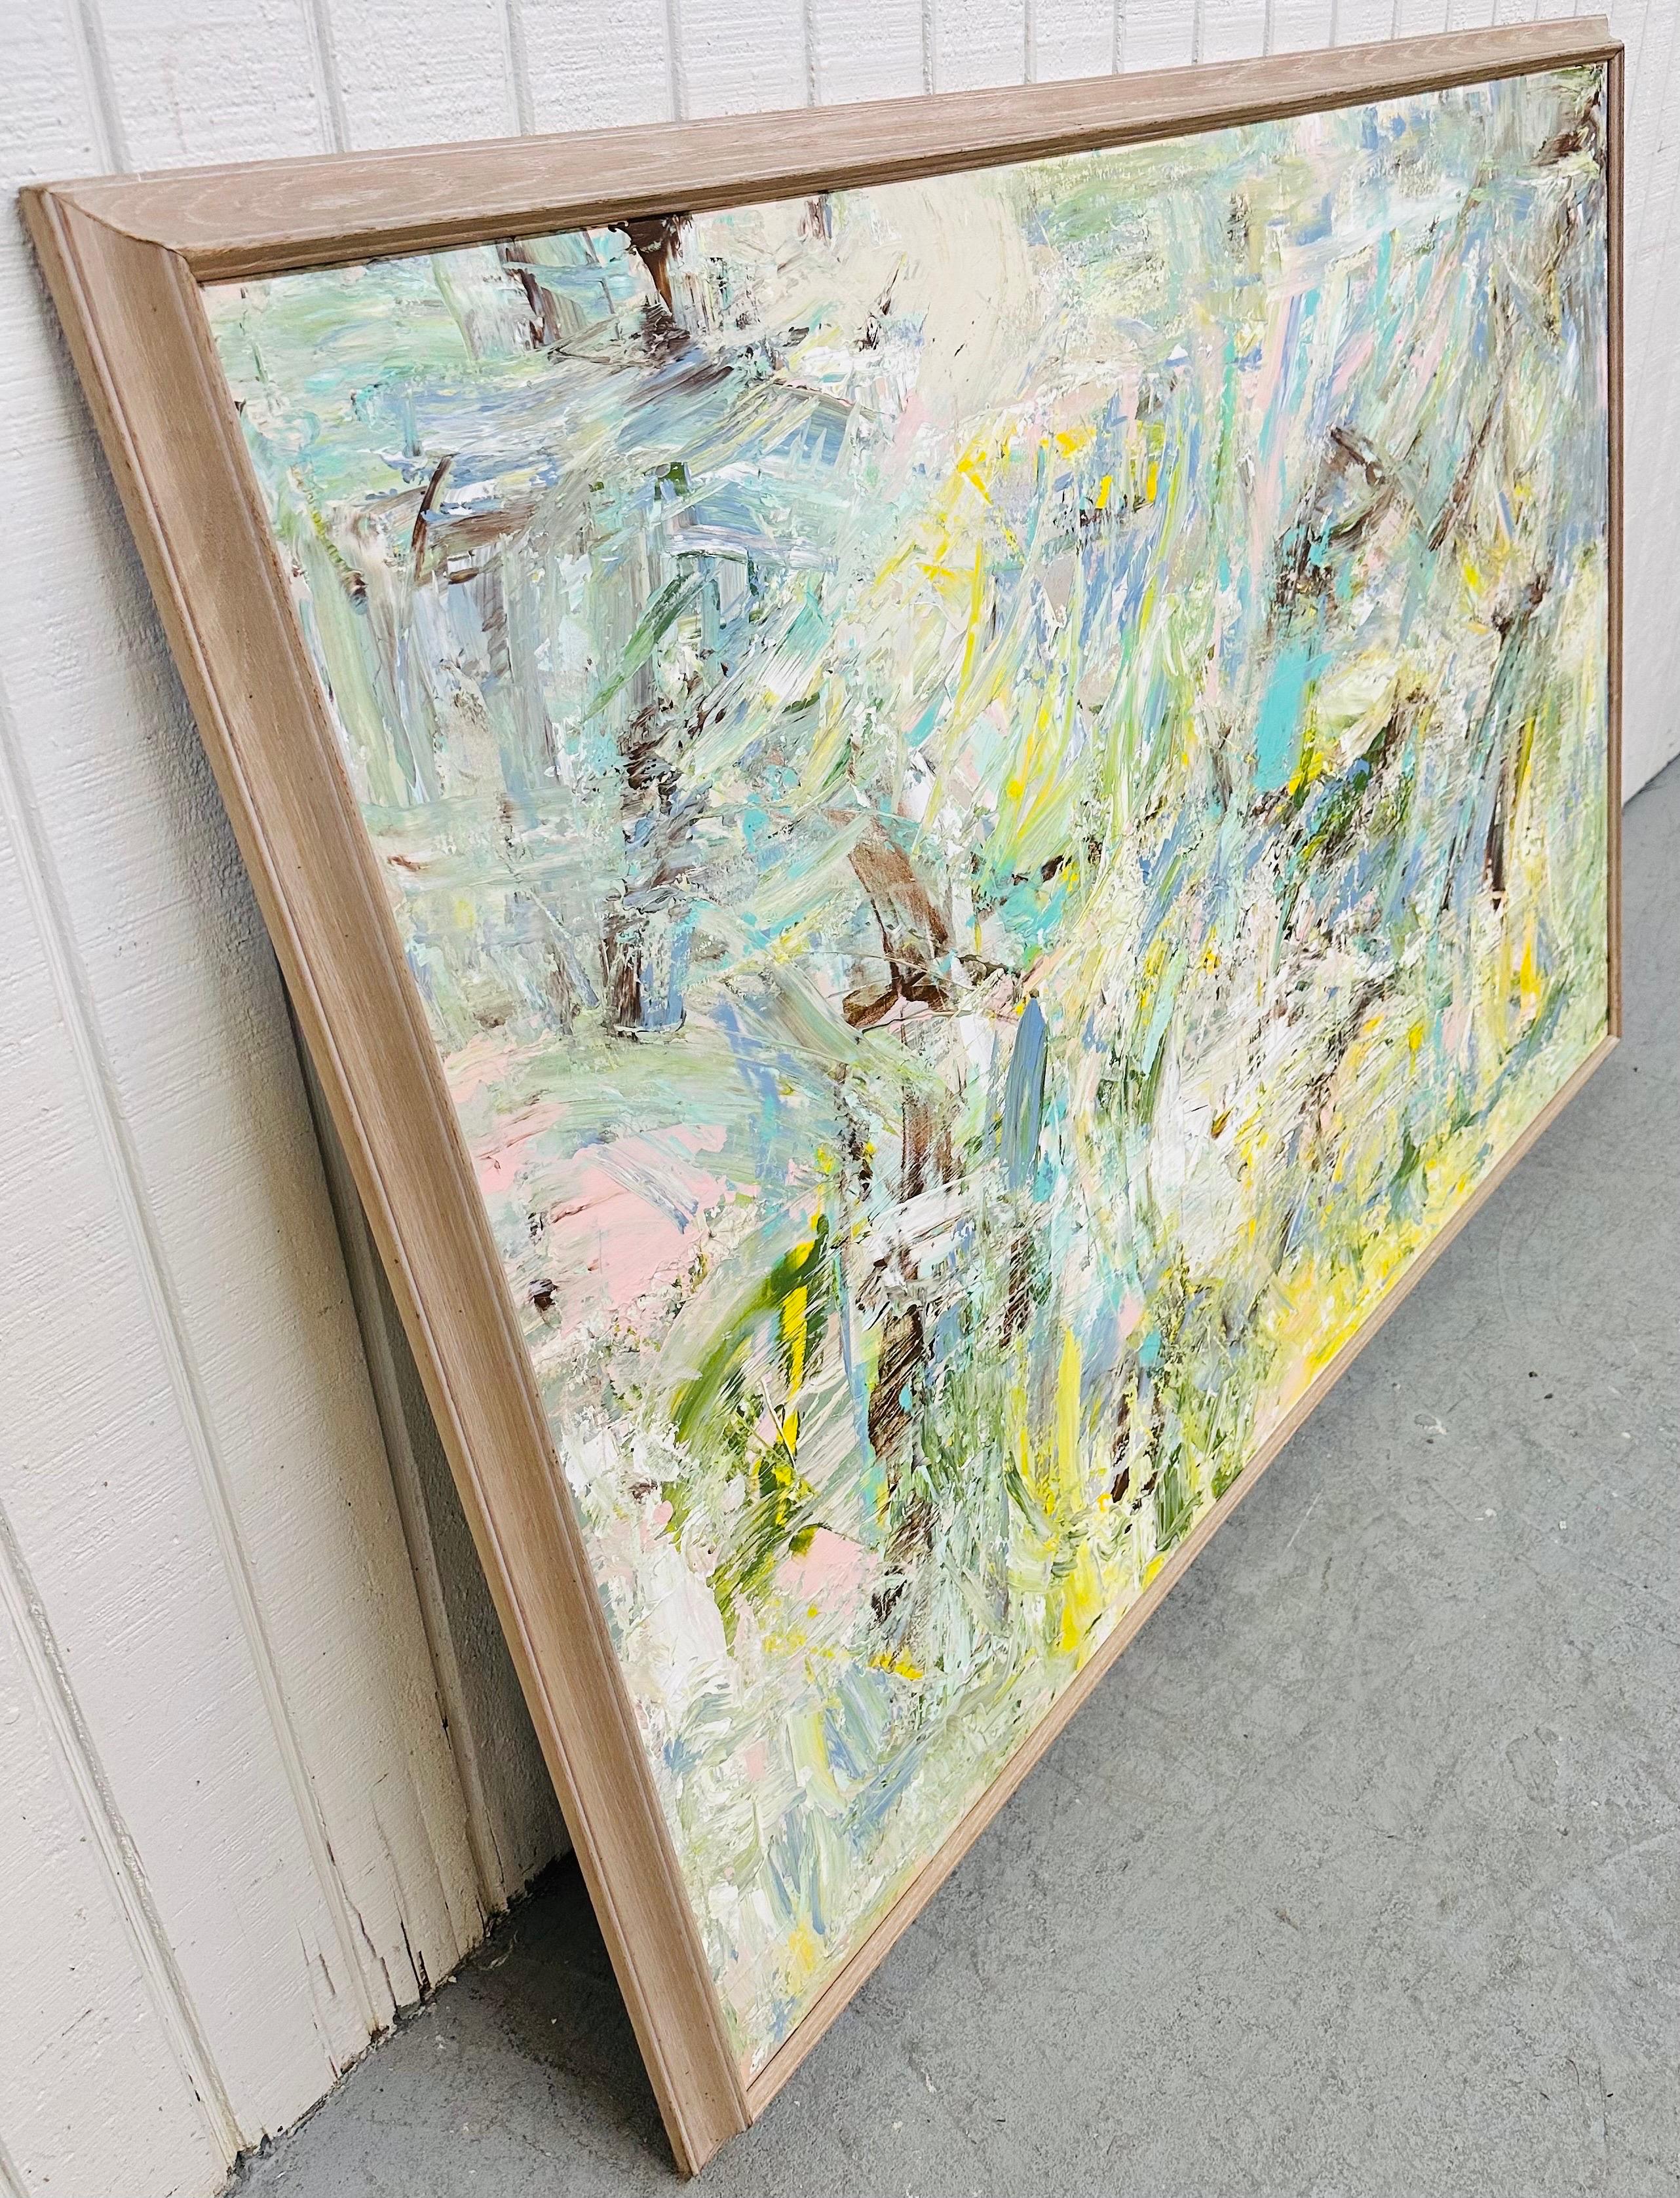 This listing is for a Large Modern Expressionist Abstract Painting. Featuring a large beach wood frame, original expressionist style abstract art with a mixture of light colors, and a wire on the back for hanging. This is an exceptional piece by